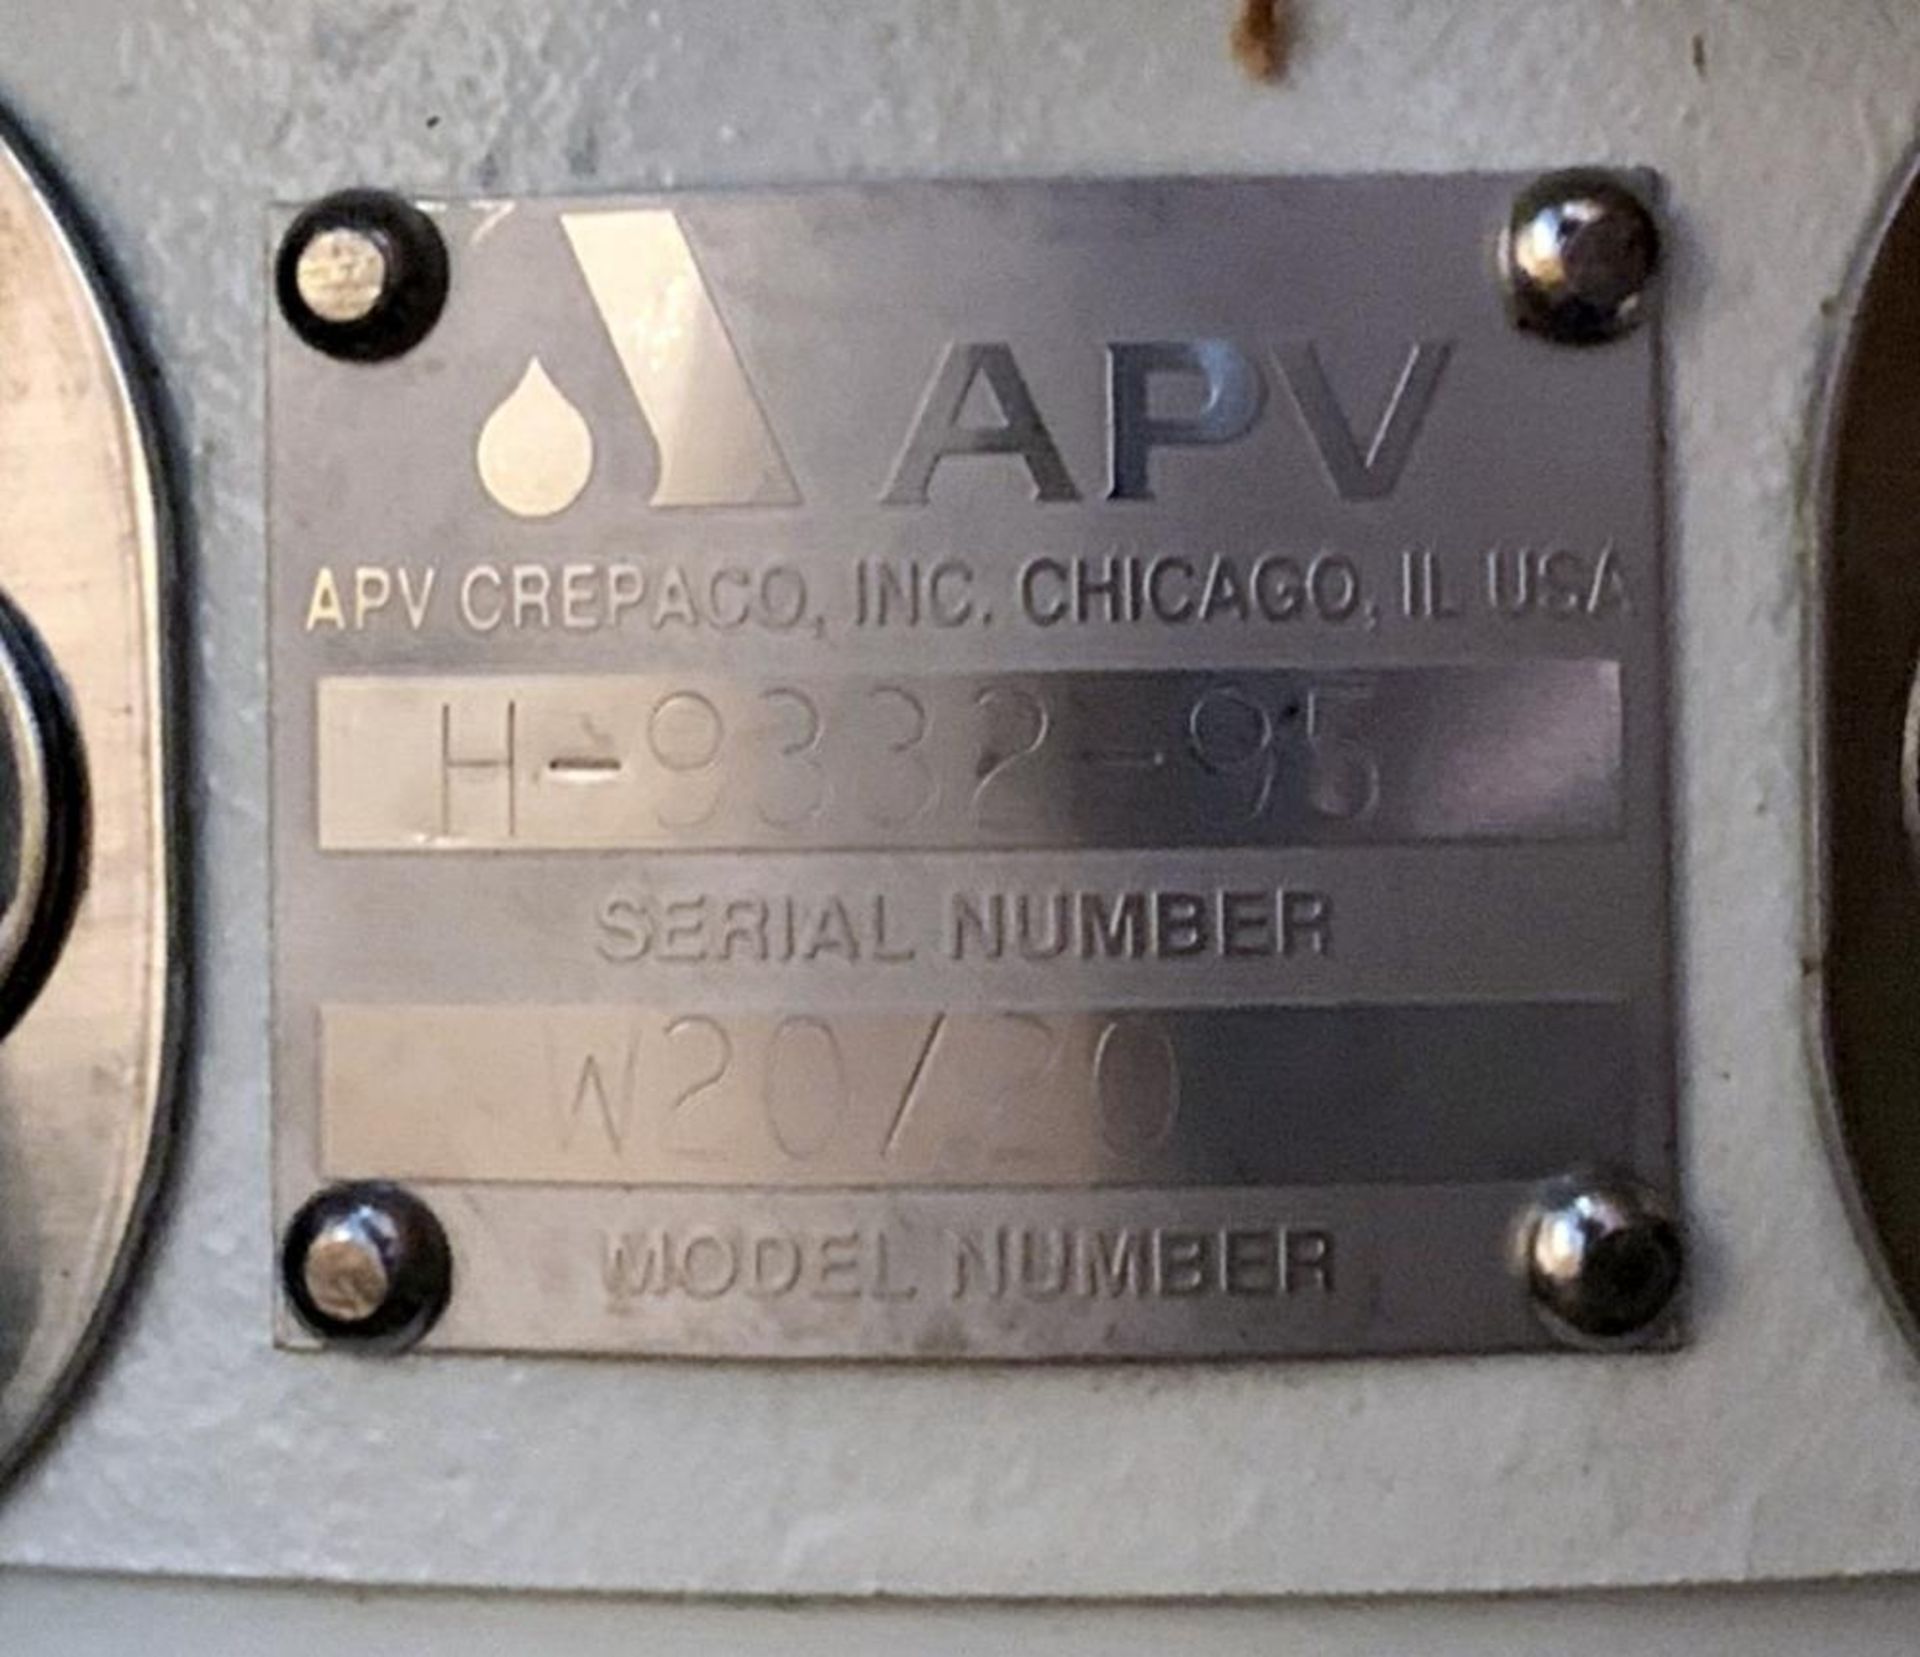 Unused- APV Crepaco Centrifugal Pump, Stainless Steel, Model W20/20. Approximate 105 gallons per min - Image 8 of 8